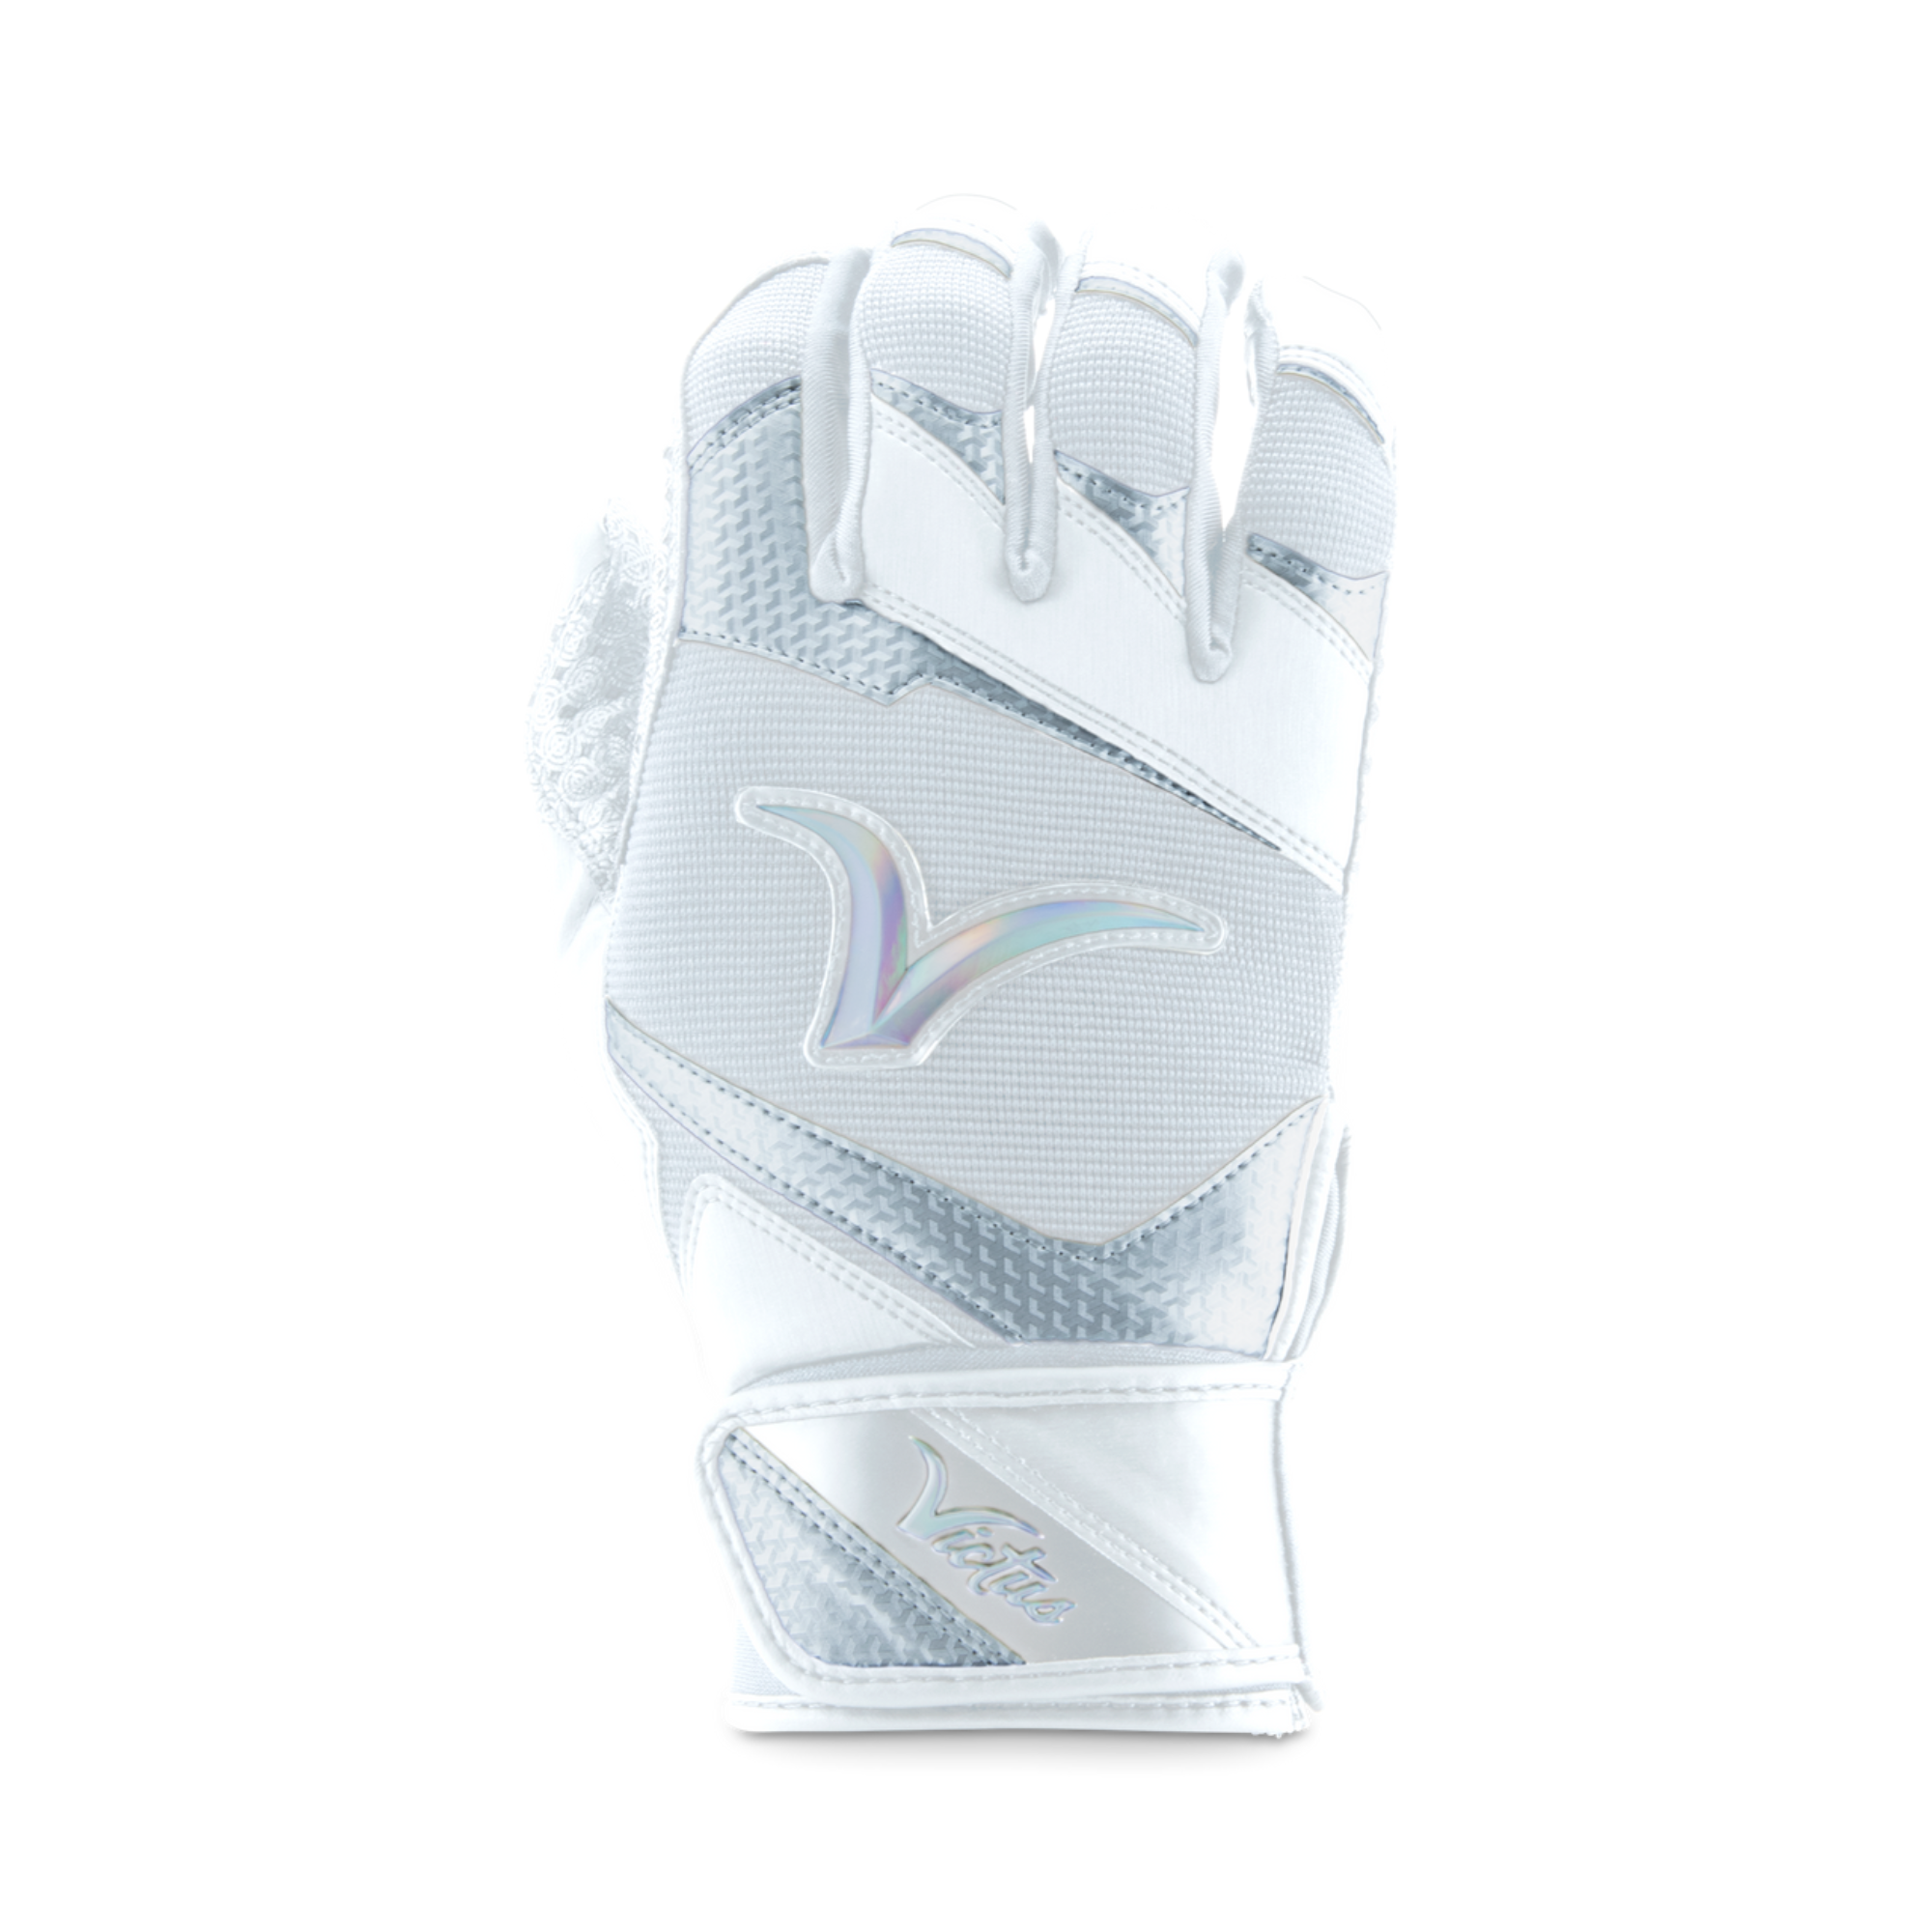 Victus Showtime Glove Adult White